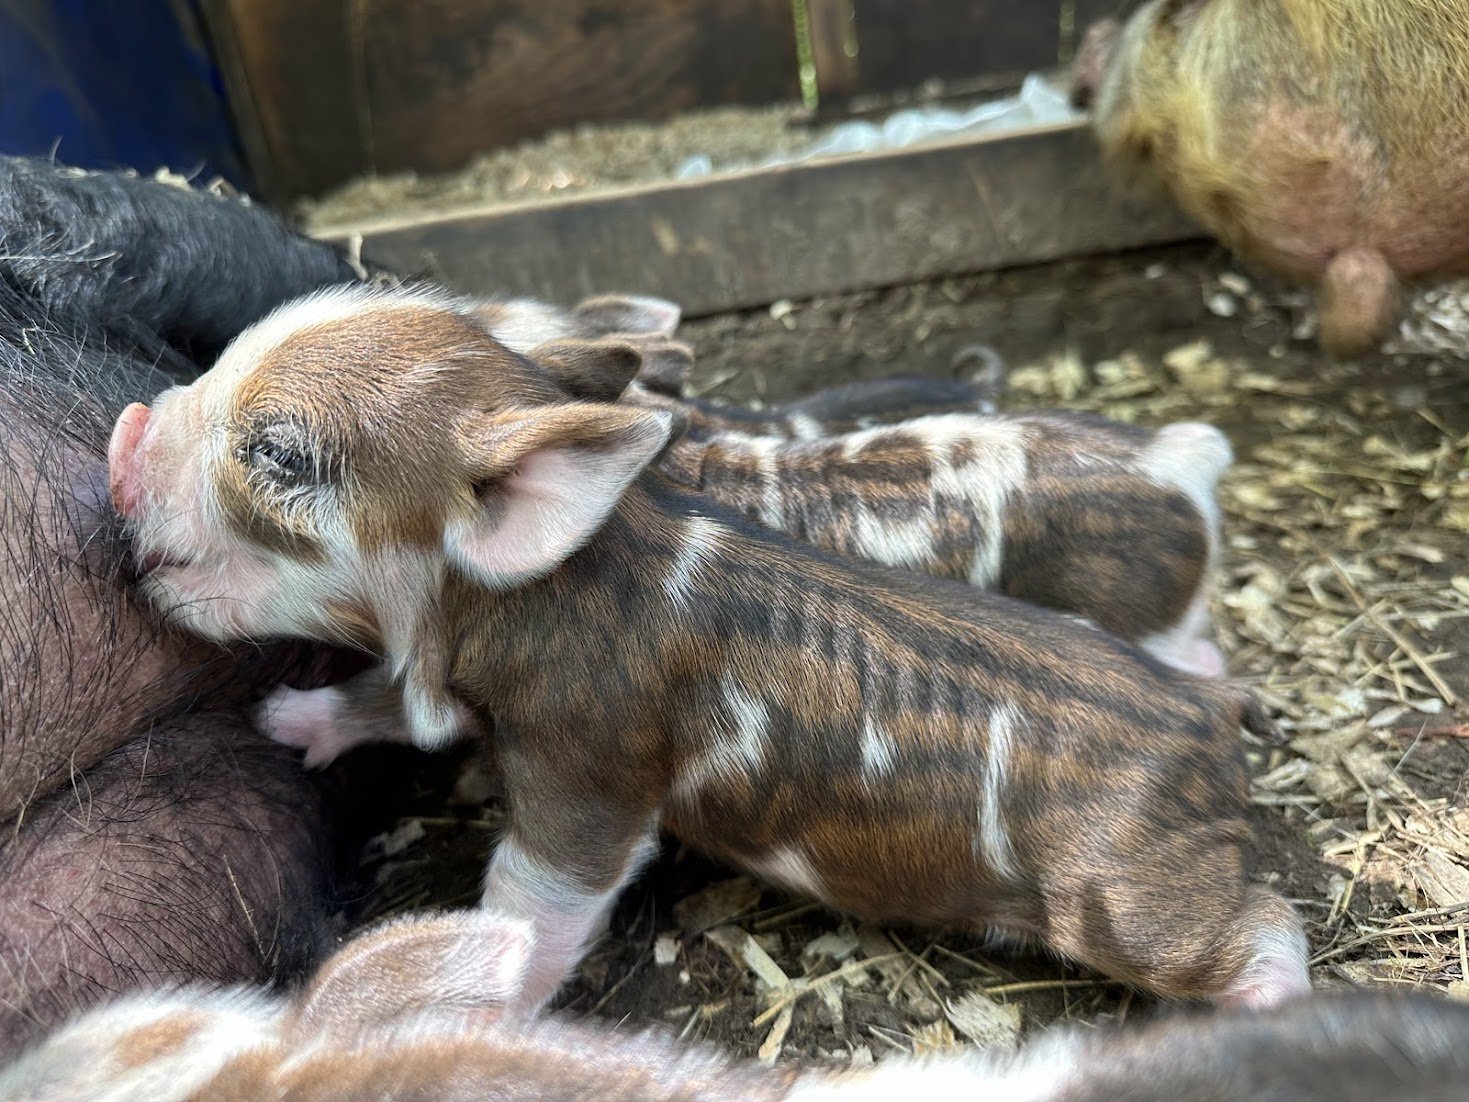 🌾🐷 Beautiful KuneKune gilts for sale! 🌾🐷

Are you or someone you know looking for pigs that thrive on pasture and bring a touch of charm to your farm? Look no further! We have 4 KuneKune gilts that will be the ideal choice for those seeking low-m